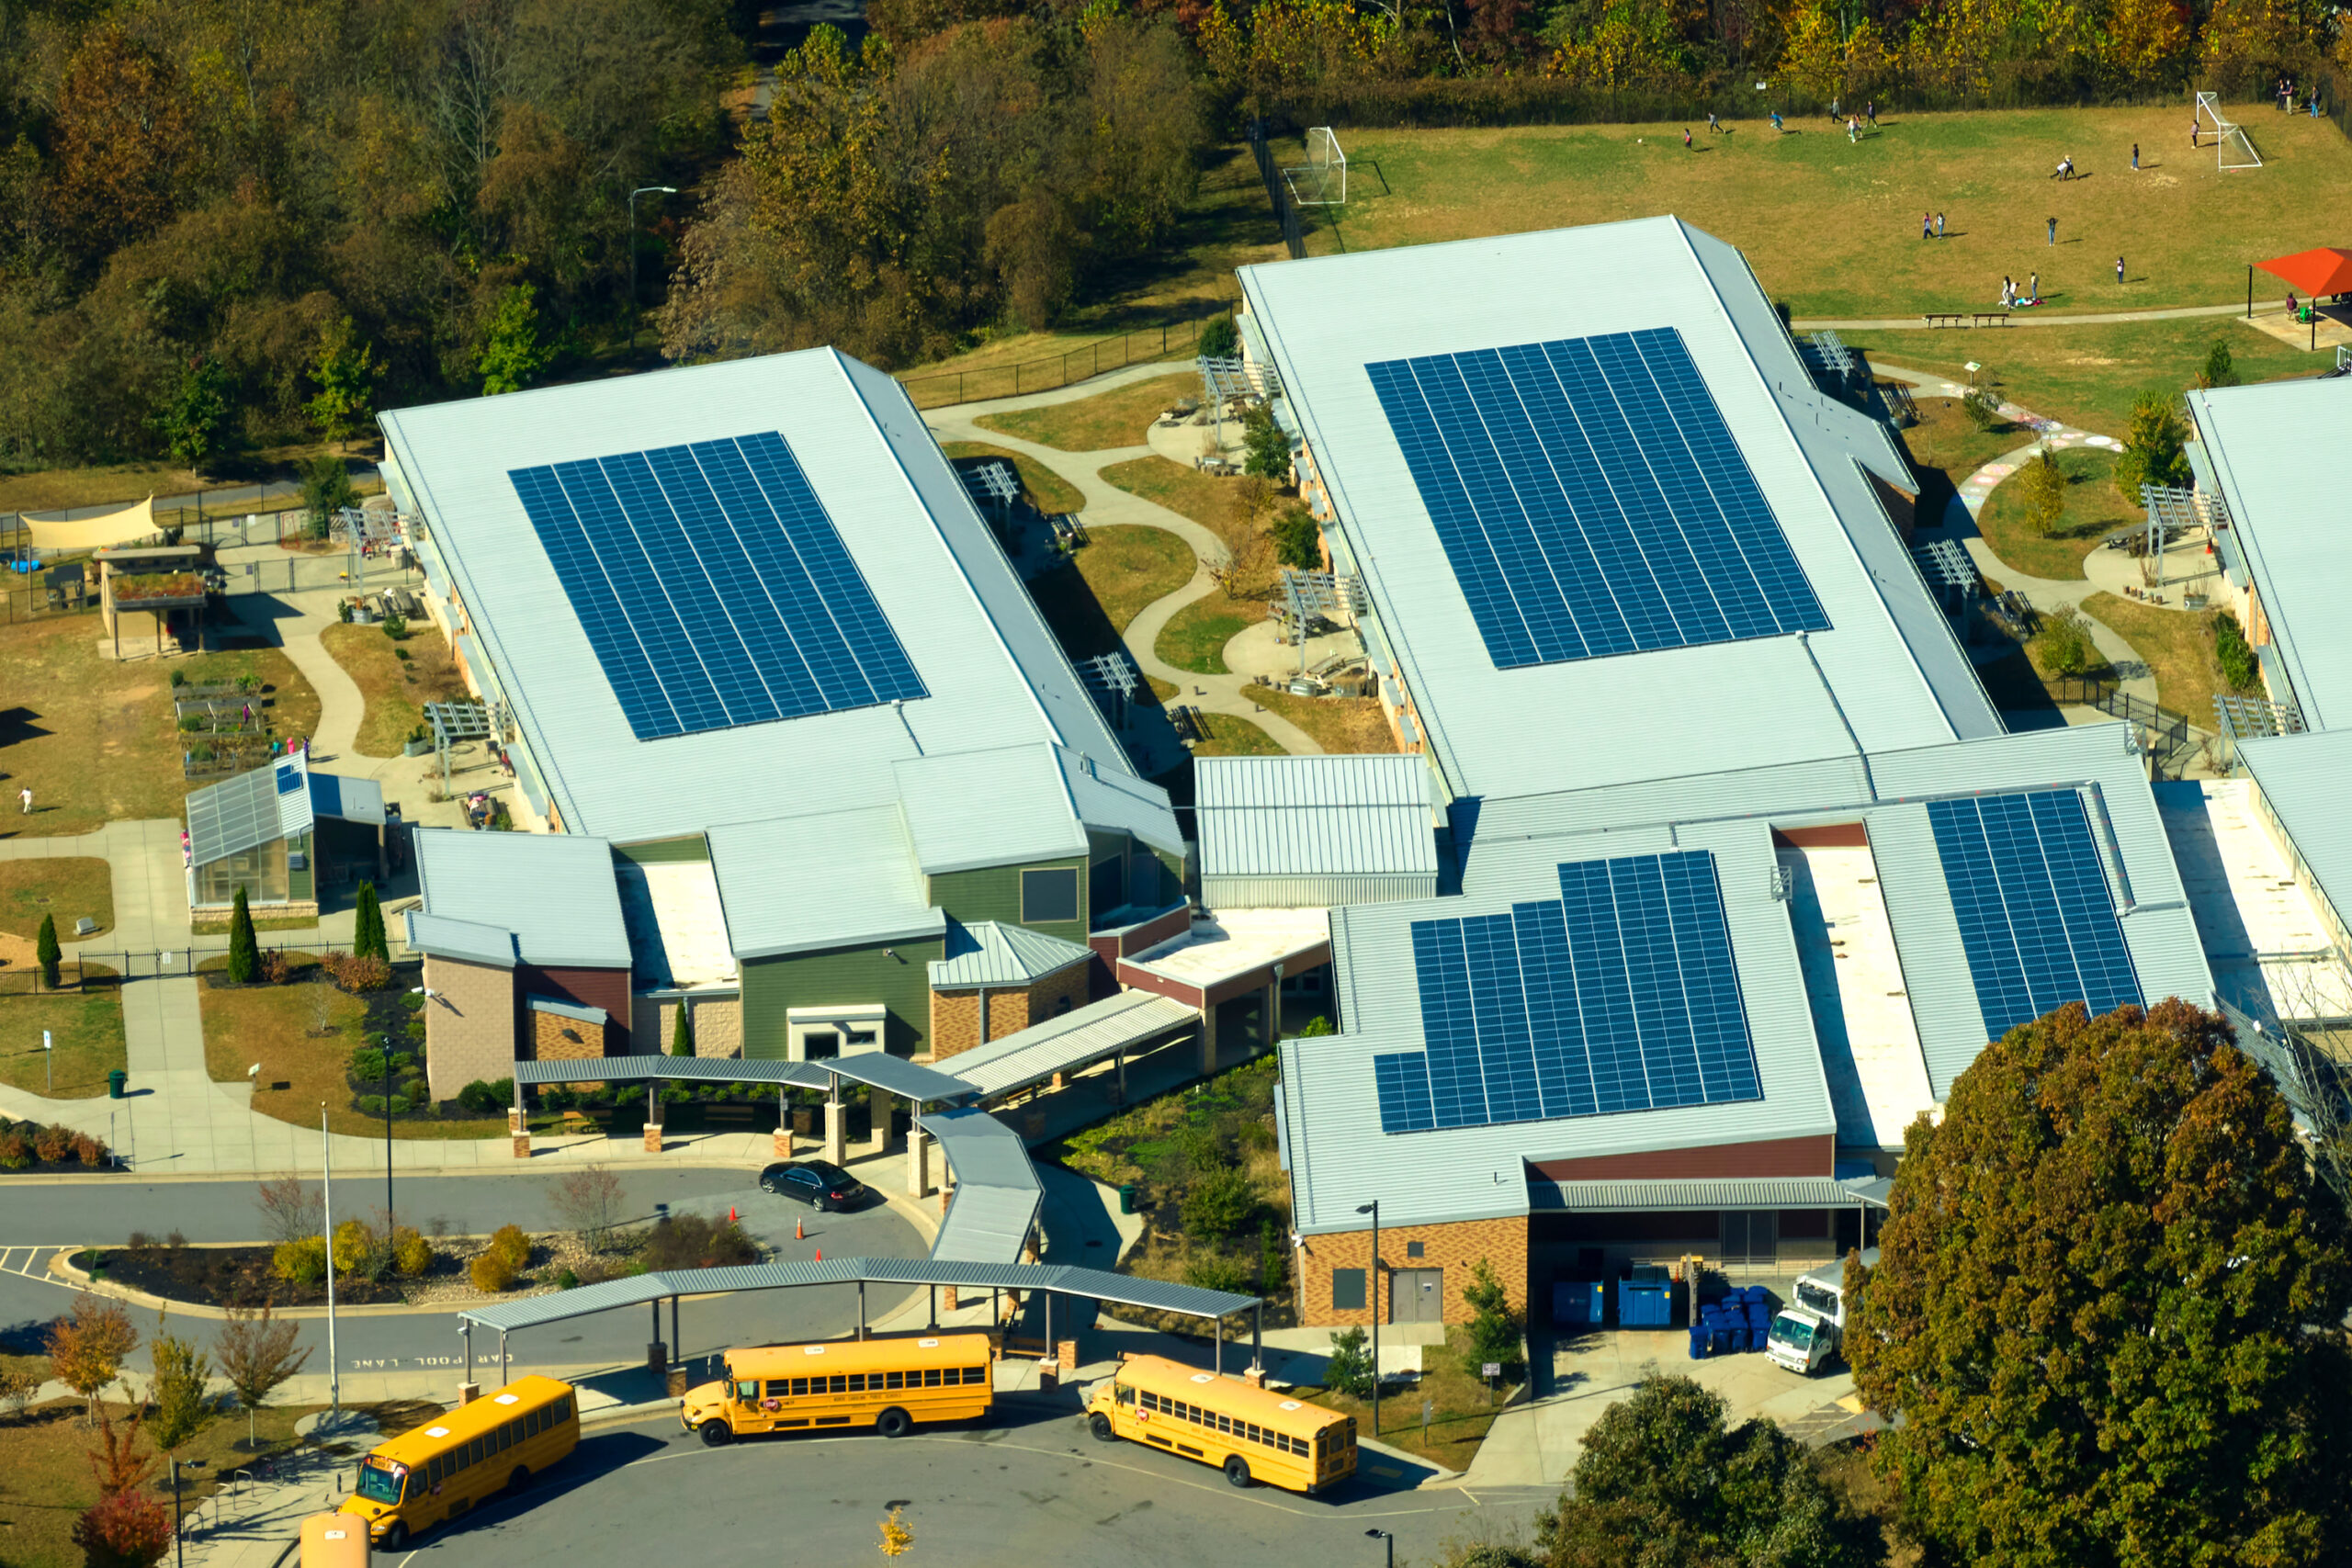 Roof of american school building covered with photovoltaic solar panels for production of electric energy. Renewable energy concept.